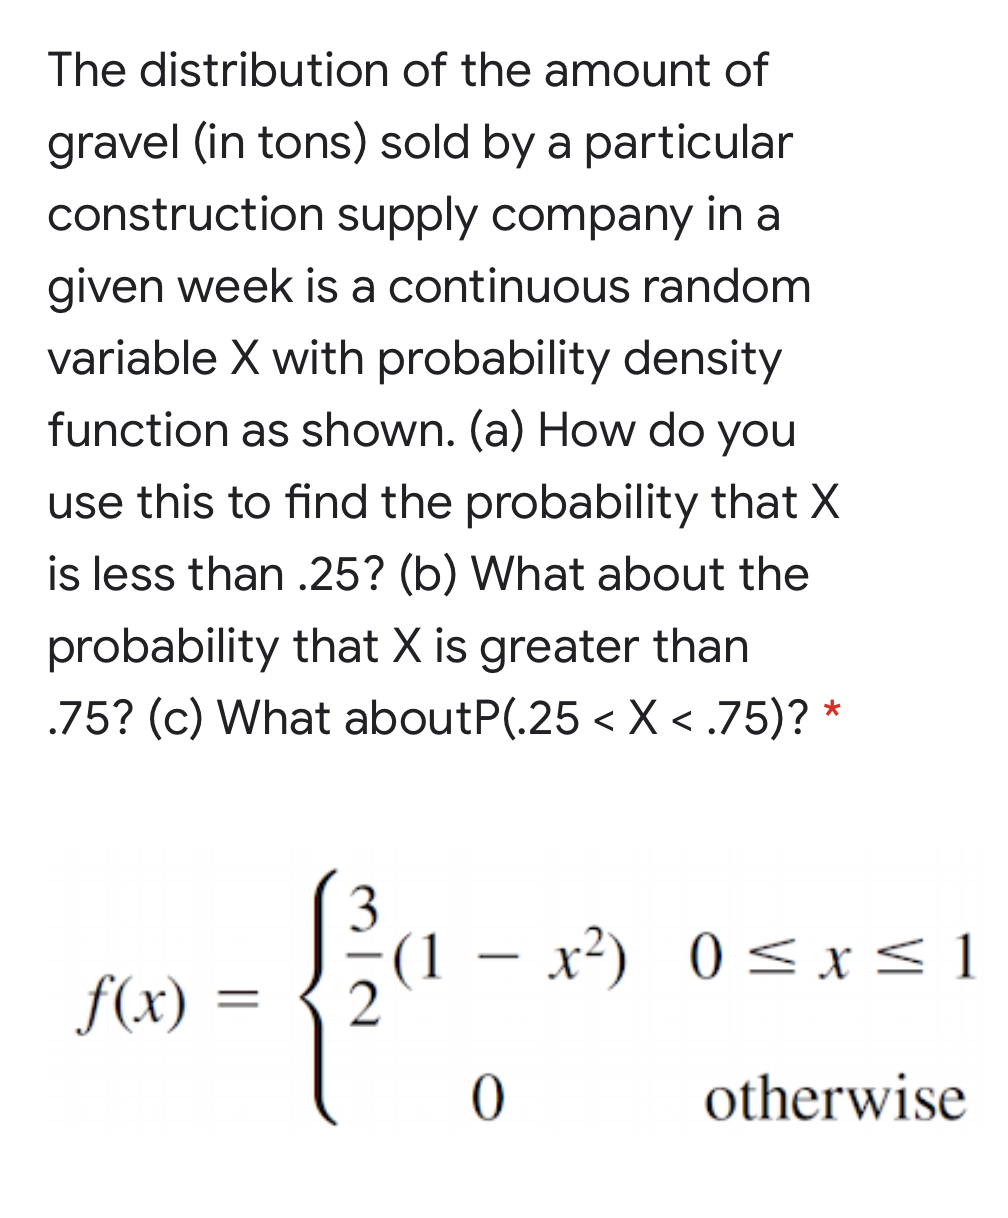 The distribution of the amount of
gravel (in tons) sold by a particular
construction supply company in a
given week is a continuous random
variable X with probability density
function as shown. (a) How do you
use this to find the probability that X
is less than .25? (b) What about the
probability that X is greater than
.75? (c) What aboutP(.25 < X < .75)? *
3
(1 – x²) 0 < x< 1
|
f(x)
otherwise
